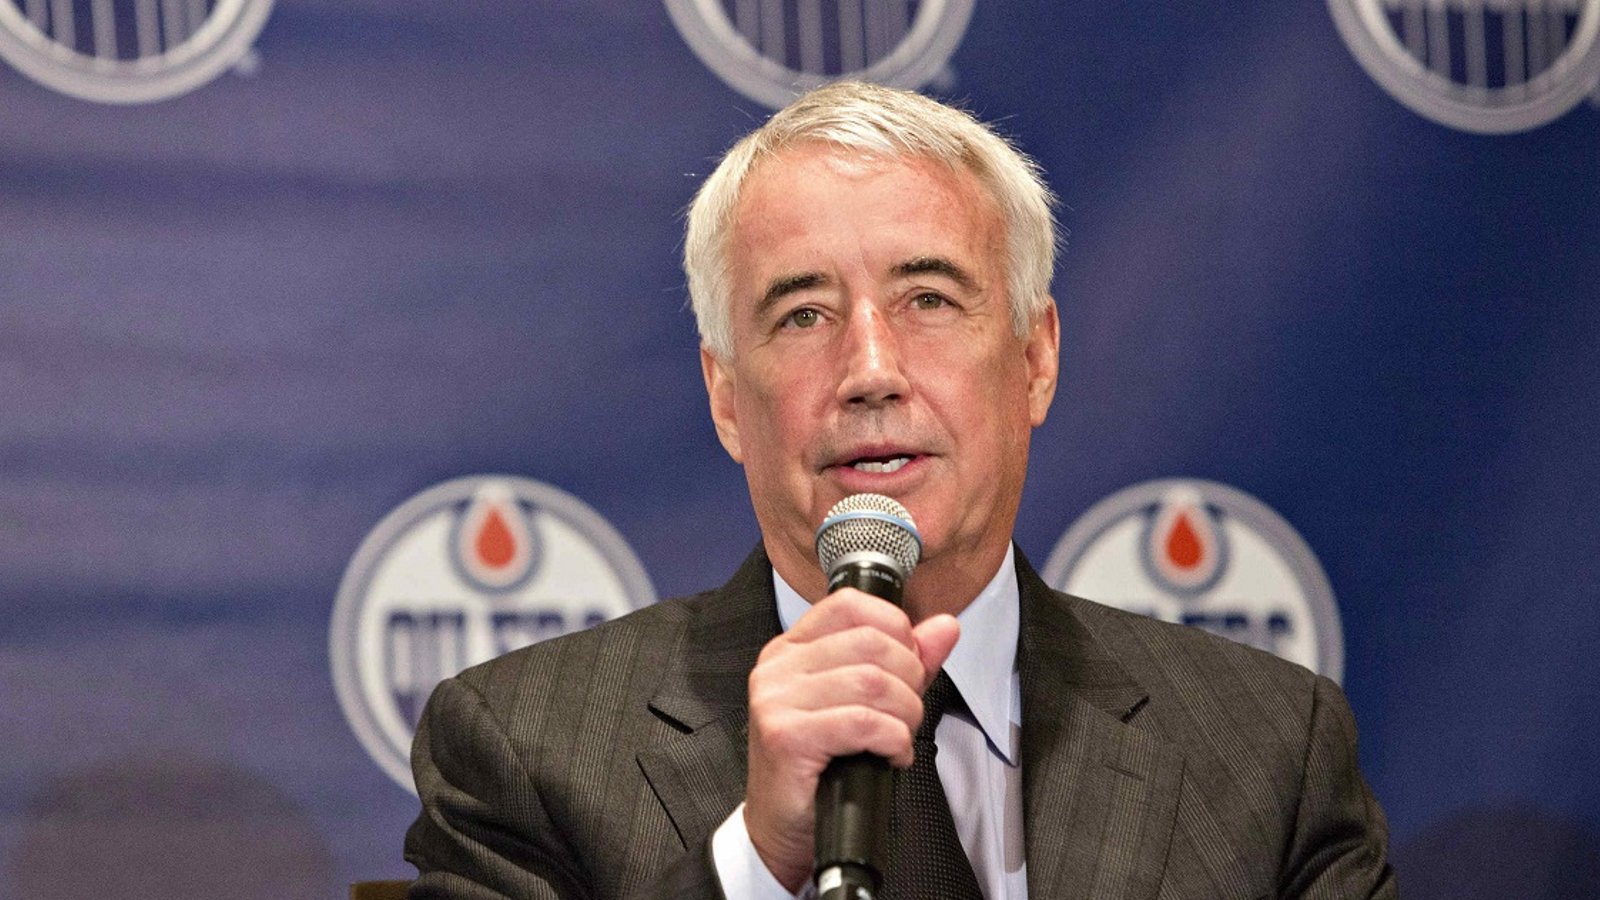 More and more signs point to Oilers hire another member of the “Old Boys Club.”